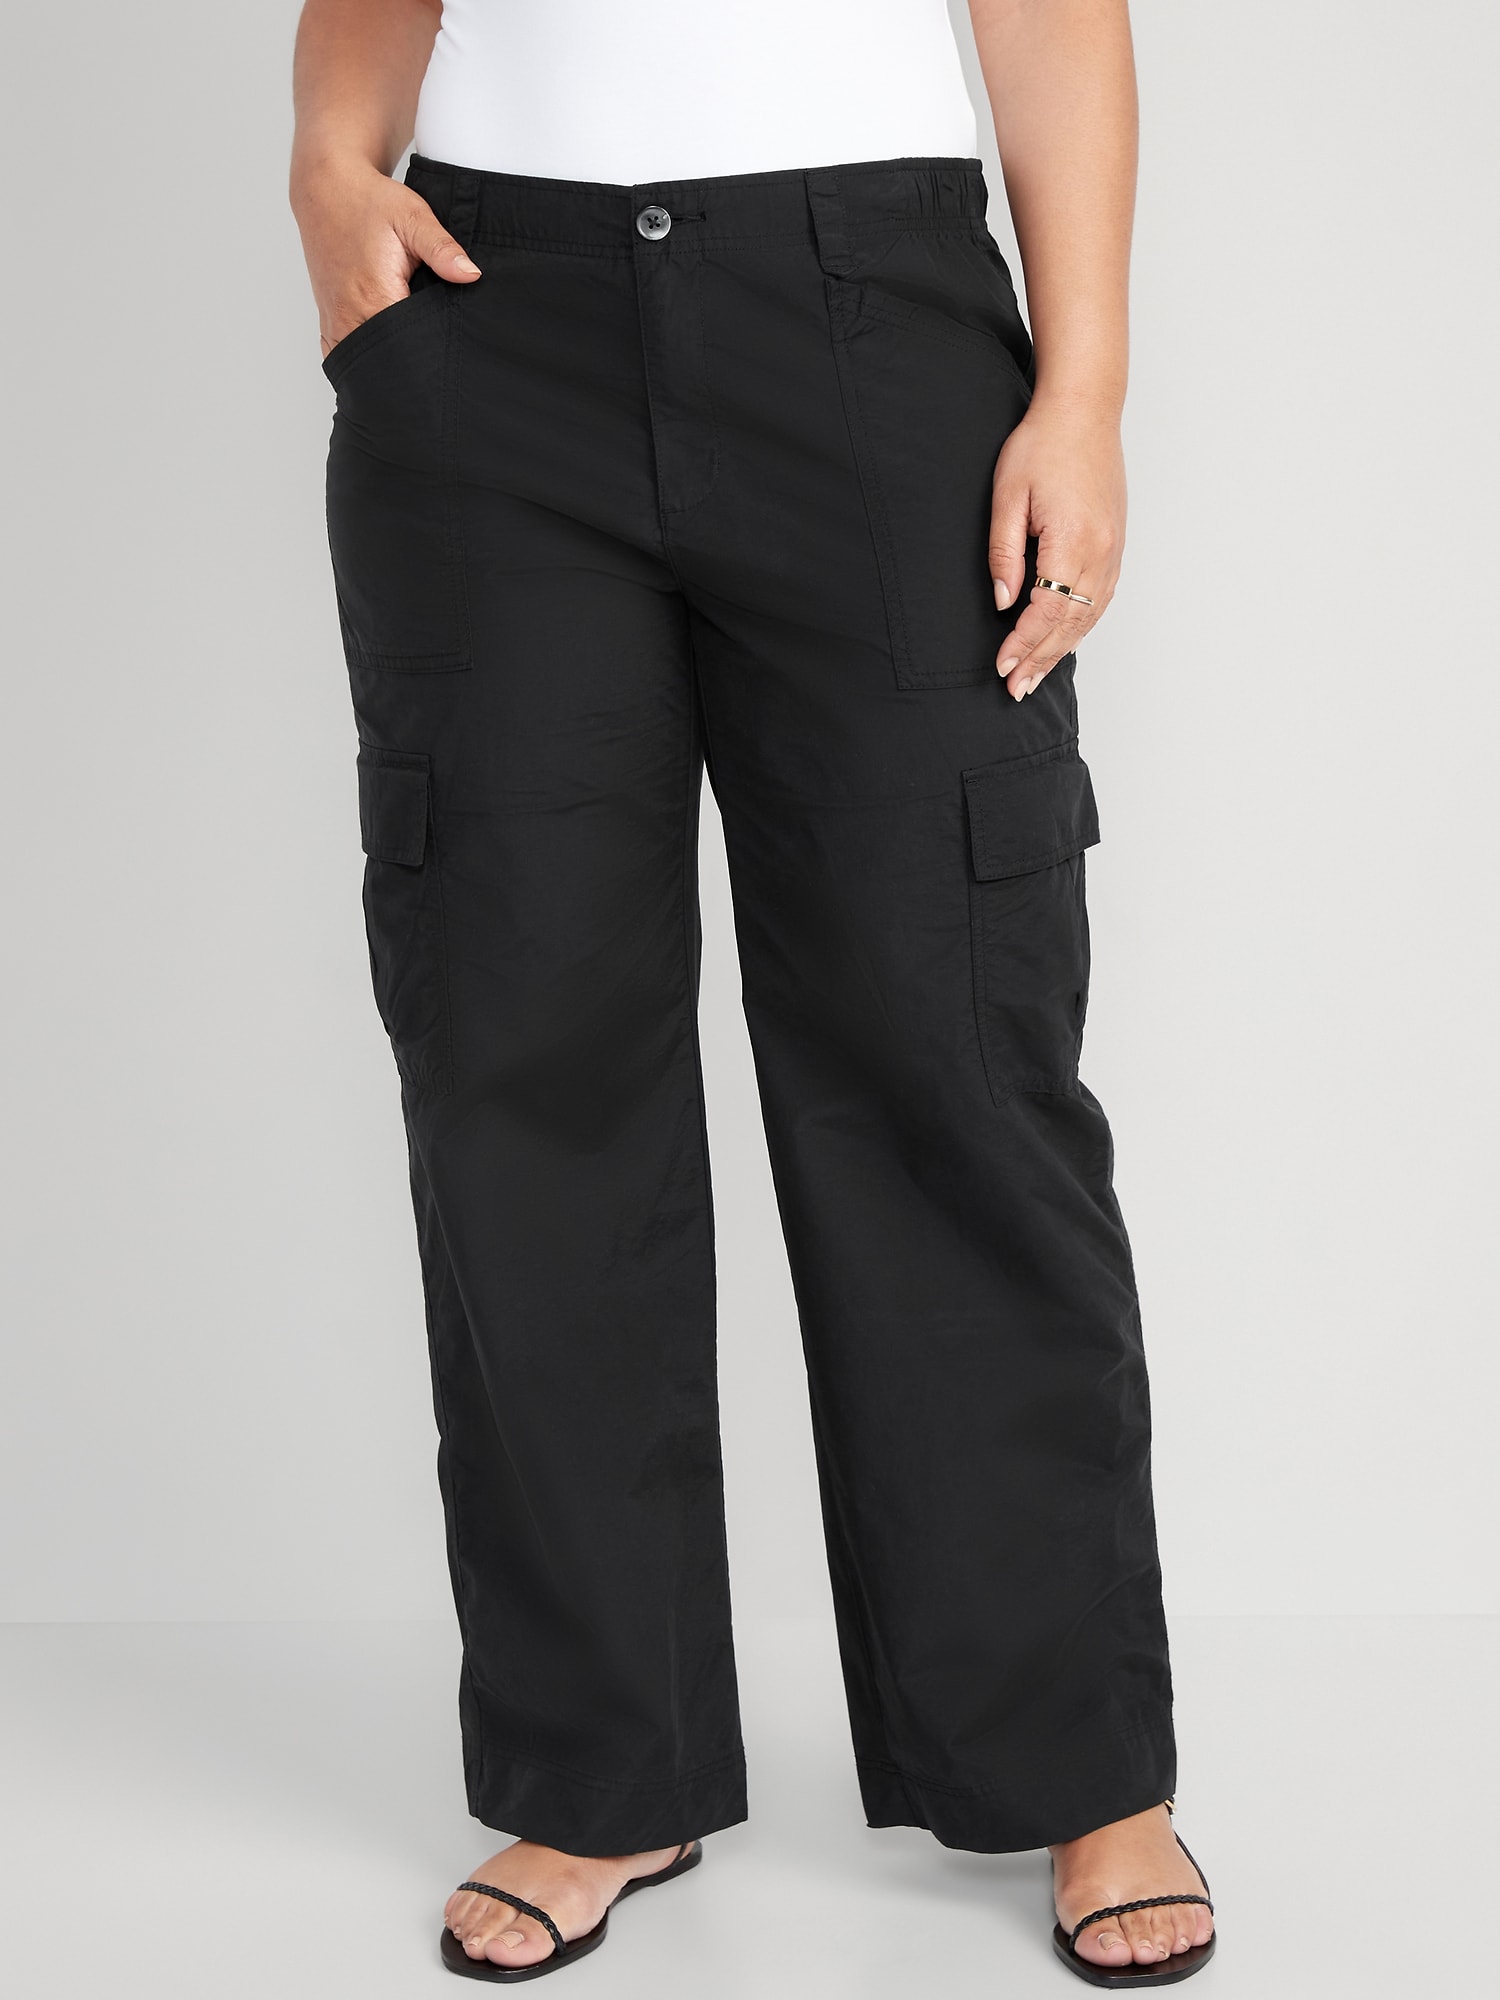 Buy Latest Cool And Comfortable Relaxed Navy Cargo Pants